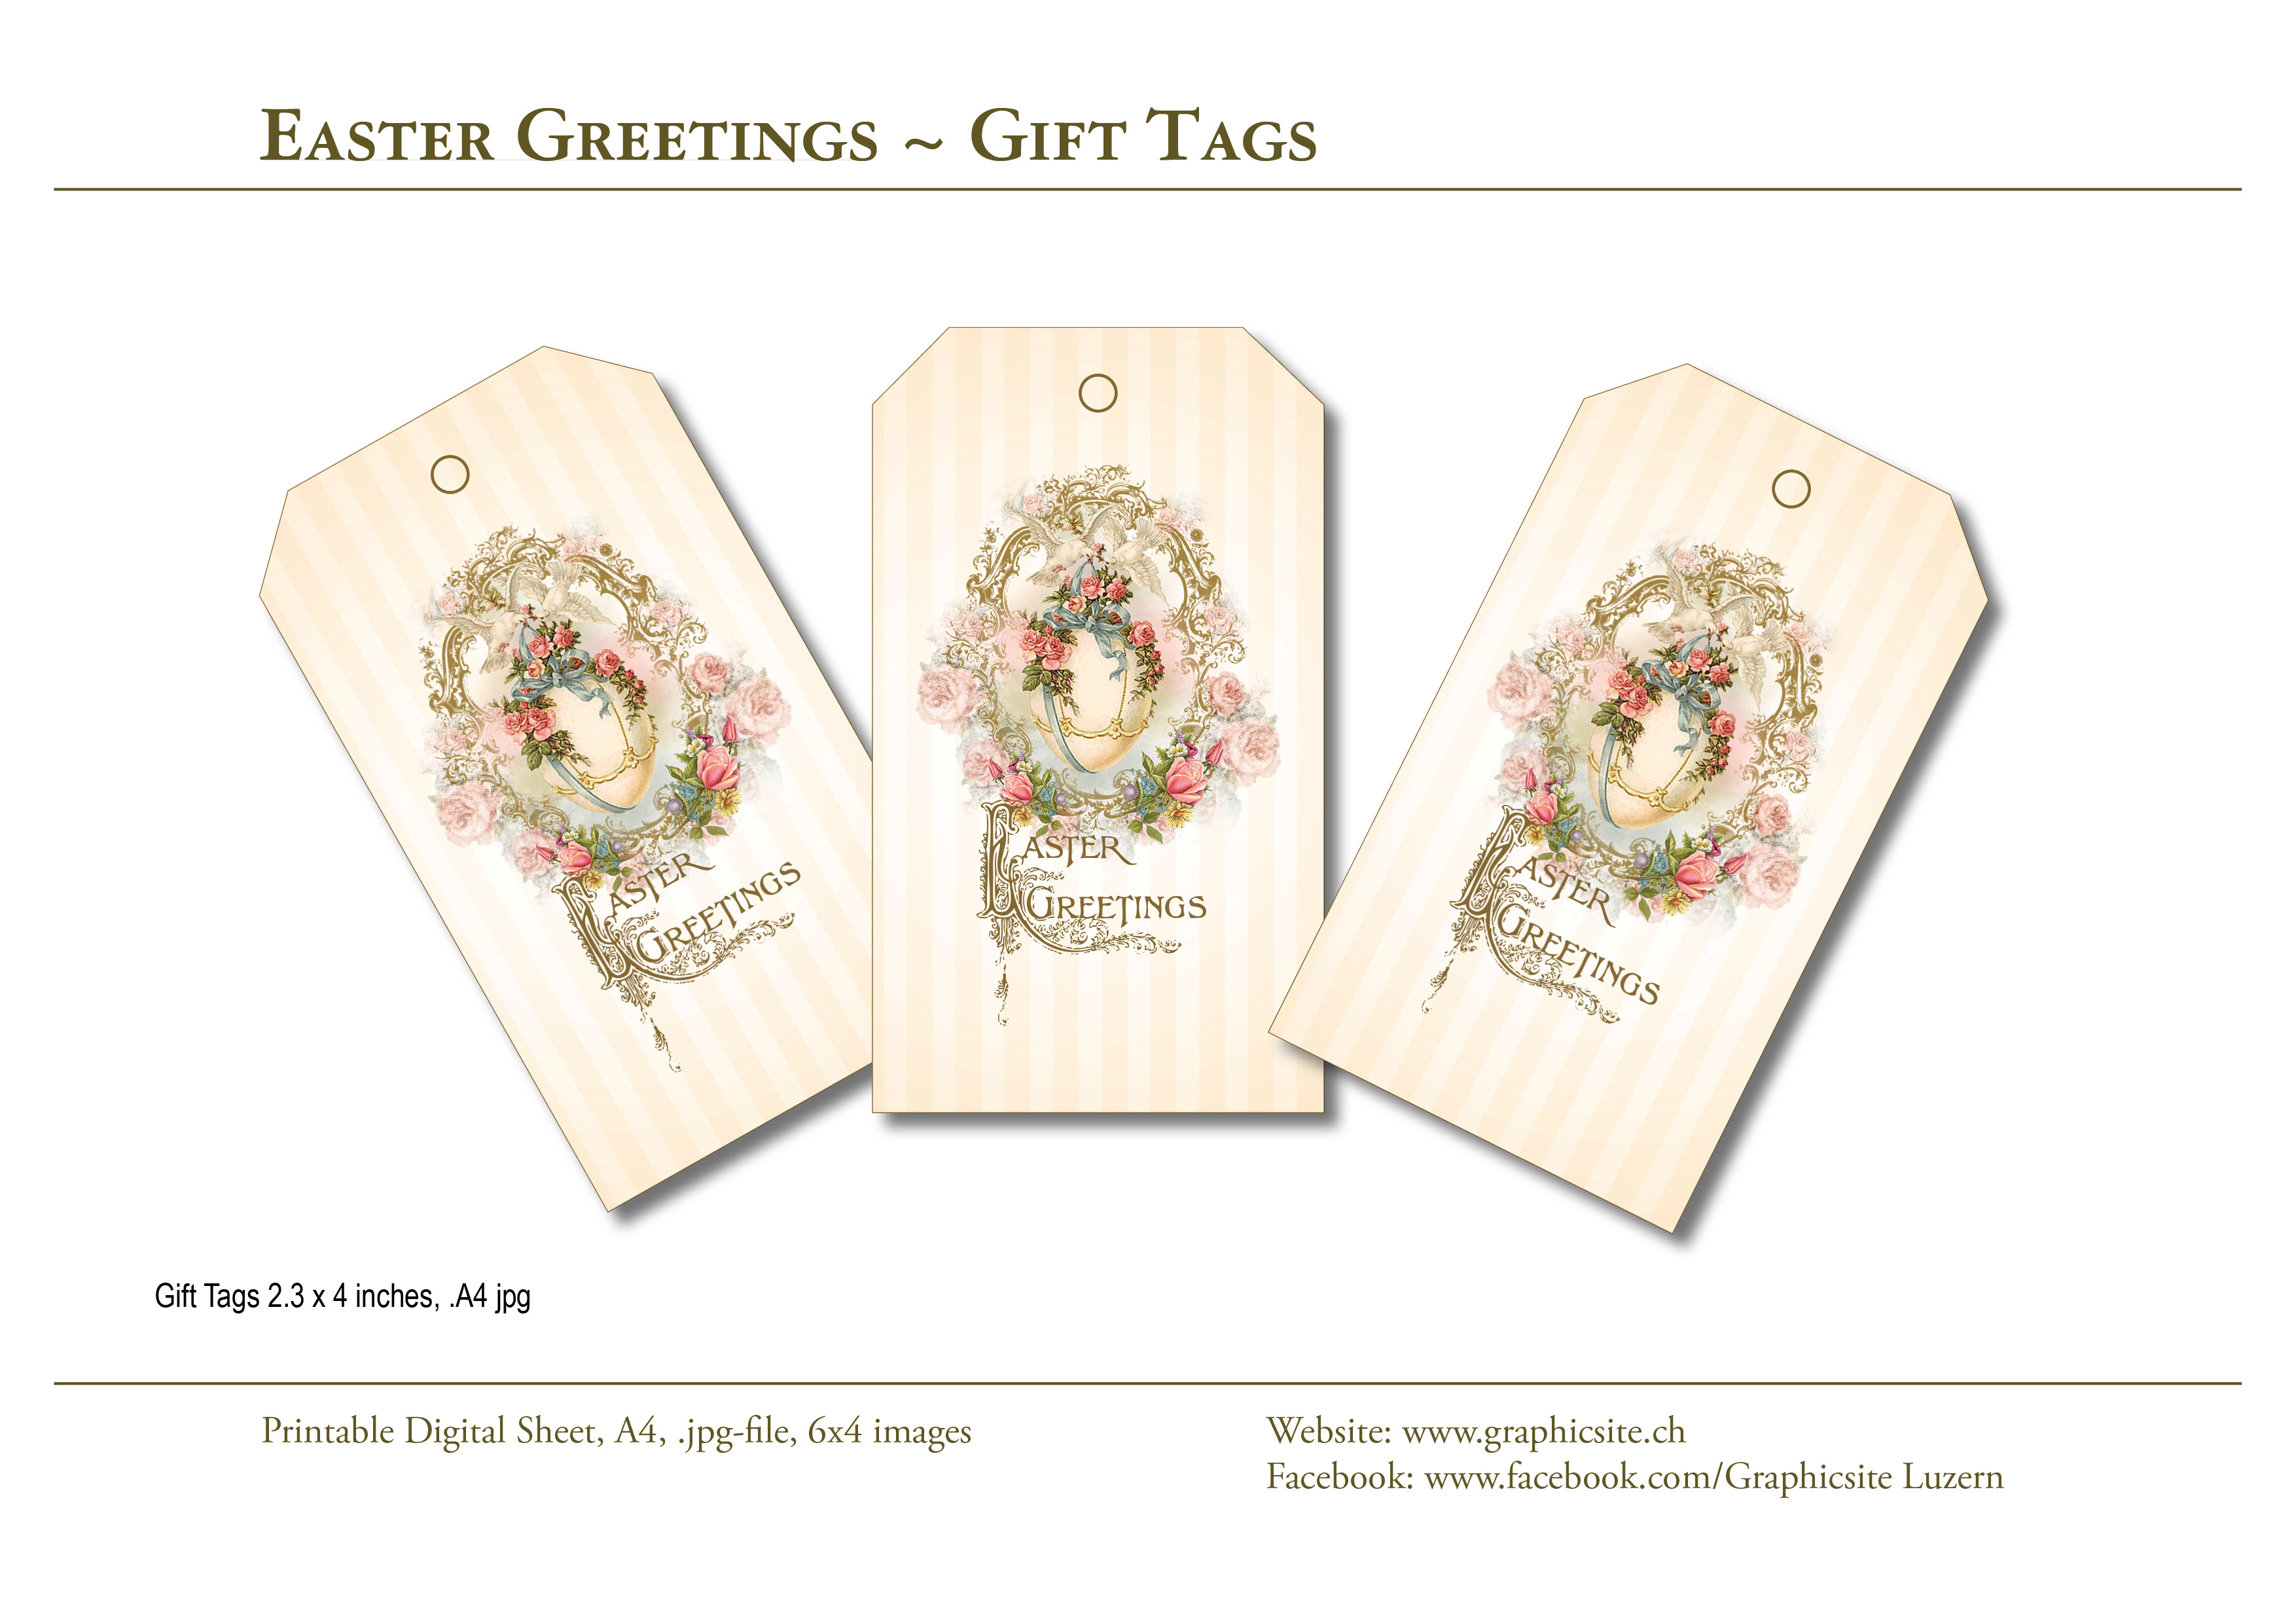 Printable Digital Sheets - Gift Tags - Easter Greetings - #easter, #gifttags, #tags, #floral, #roses, #vintage, #egg, #victorian, 